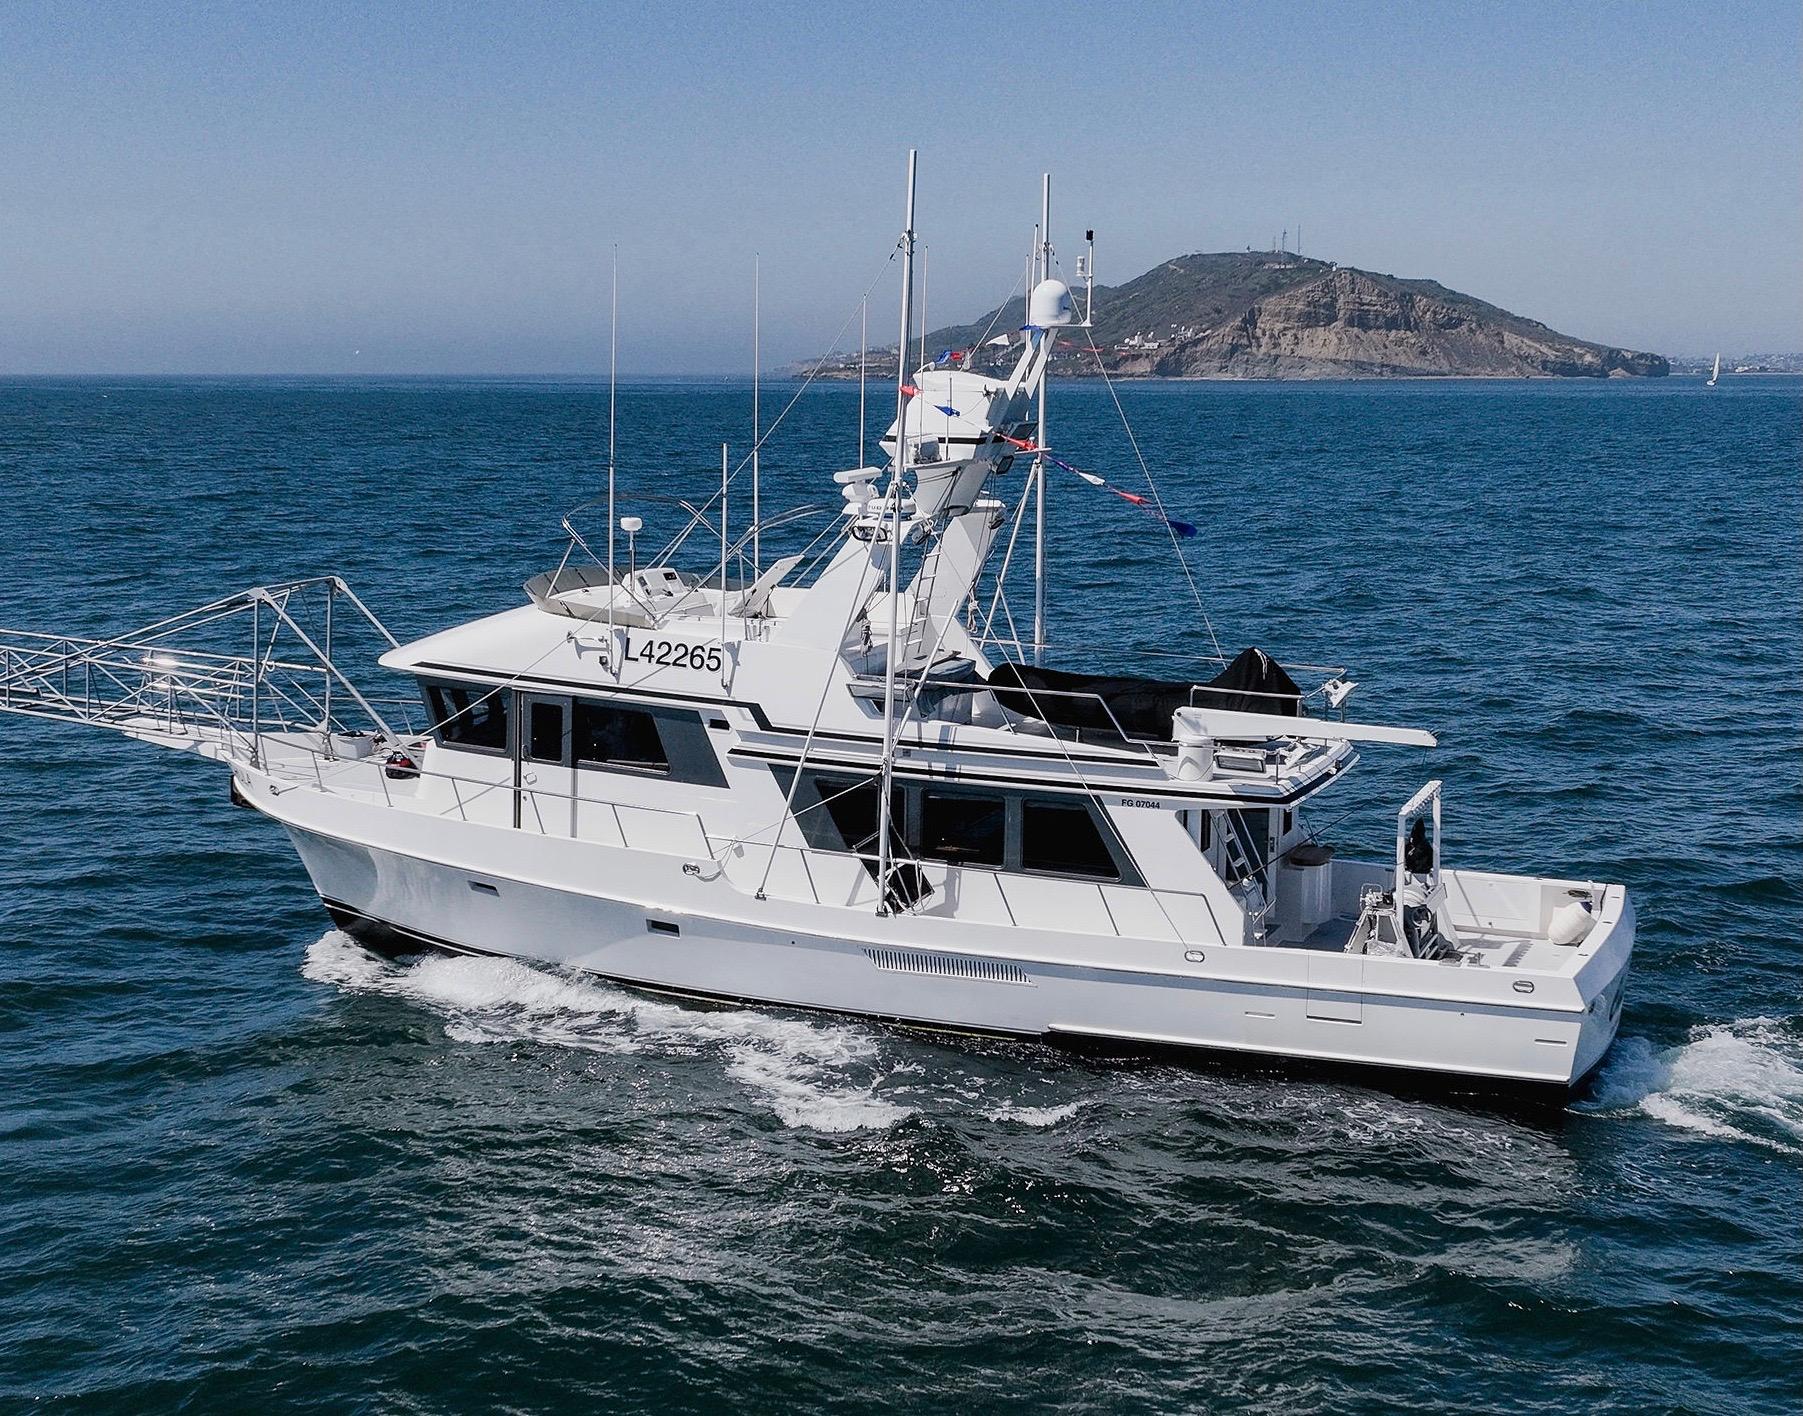 Sports fishing boats for sale - California - TopBoats